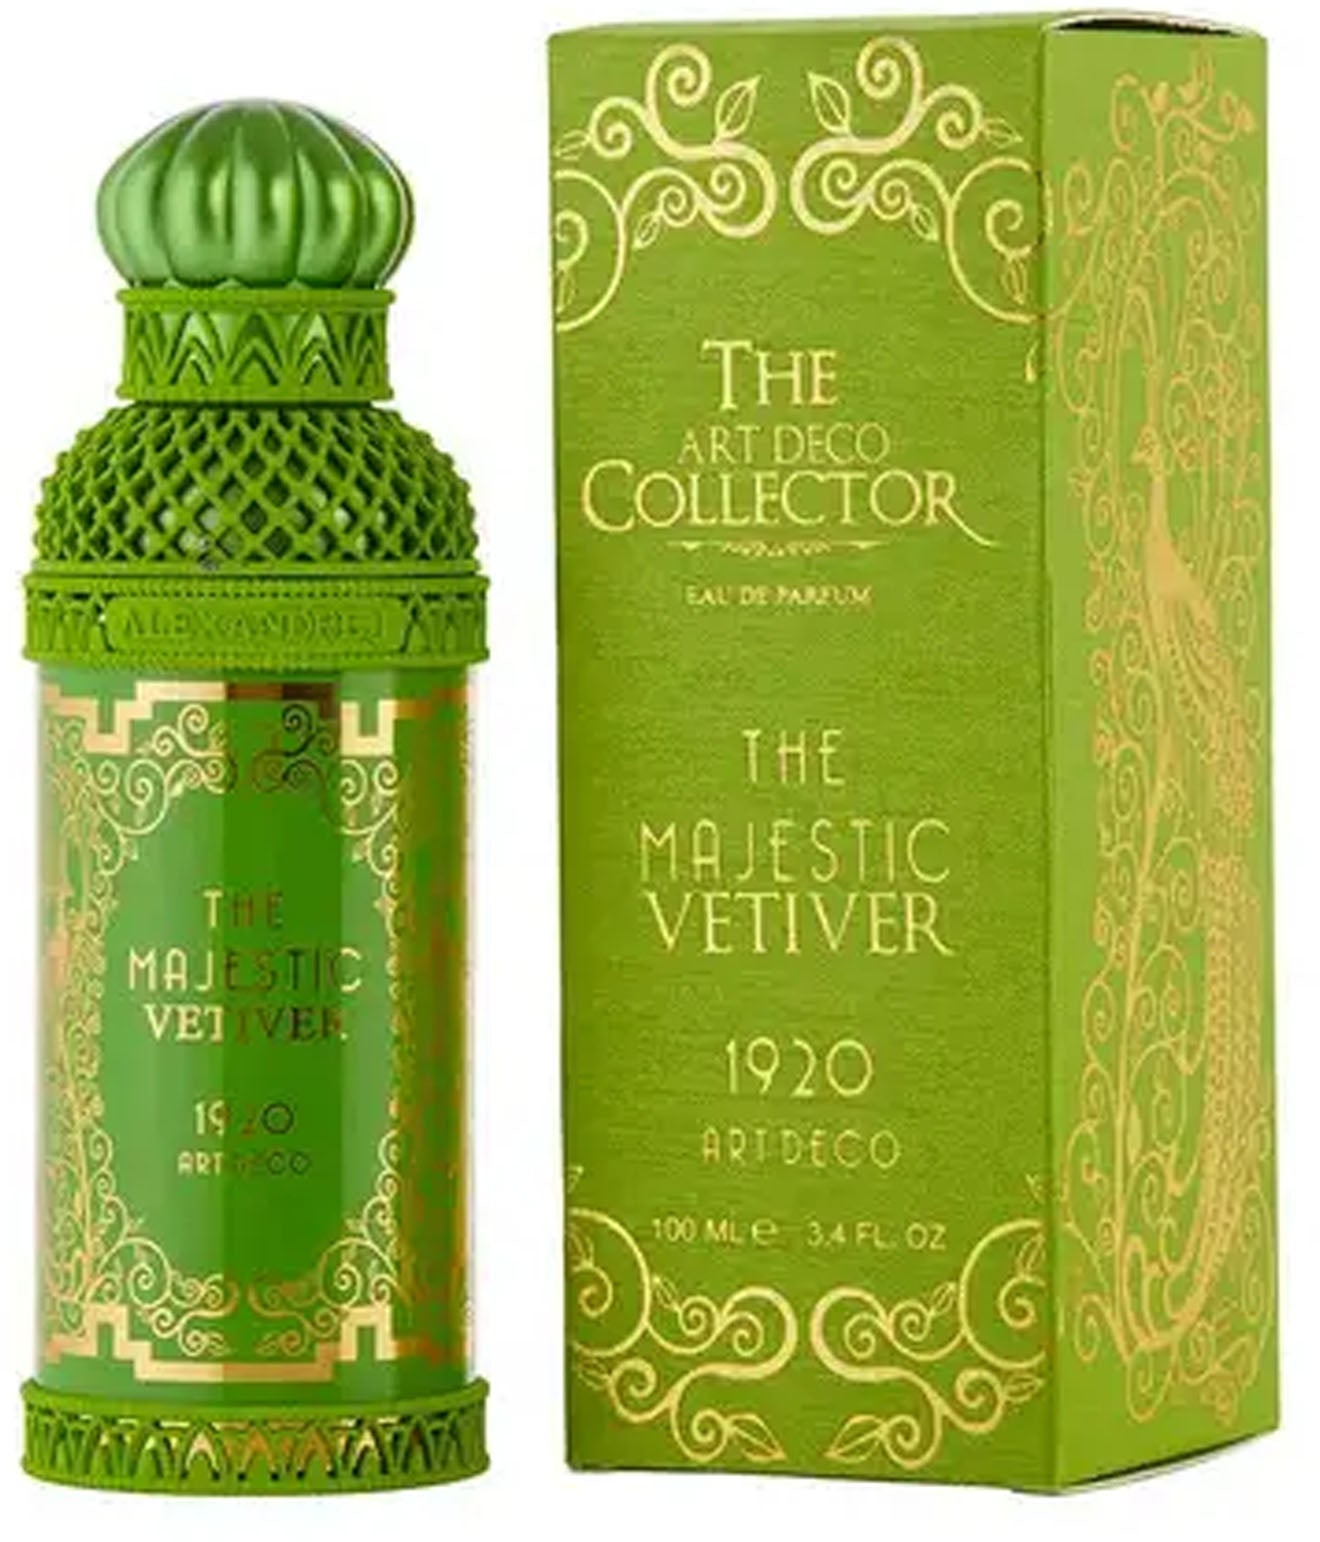 the majestic vetiver